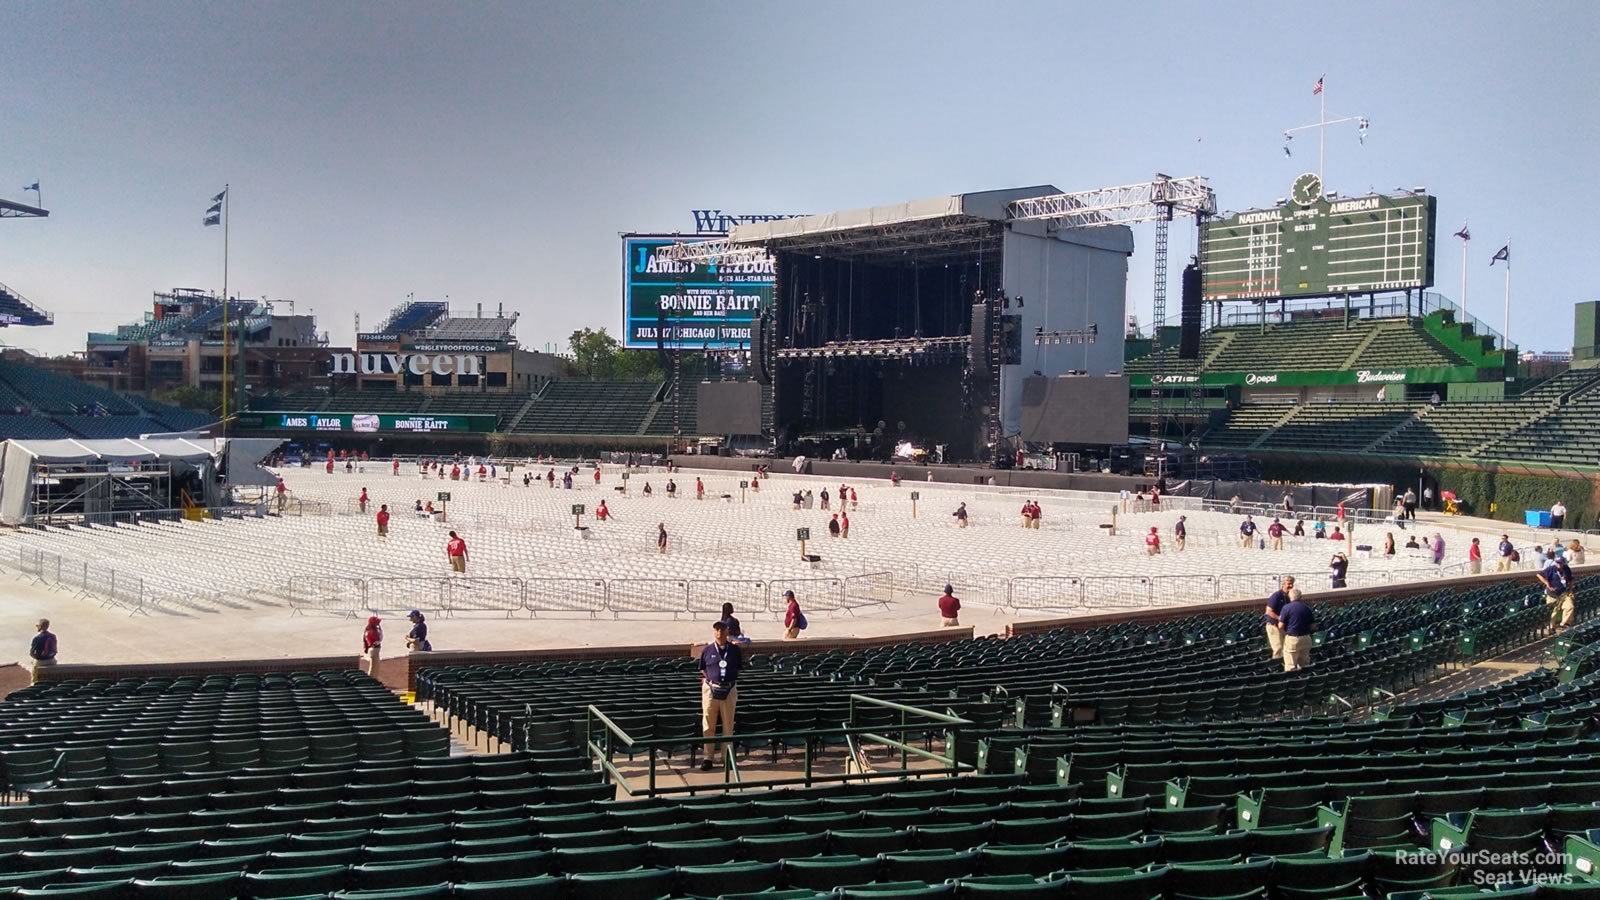 section 127, row 15 seat view  for concert - wrigley field